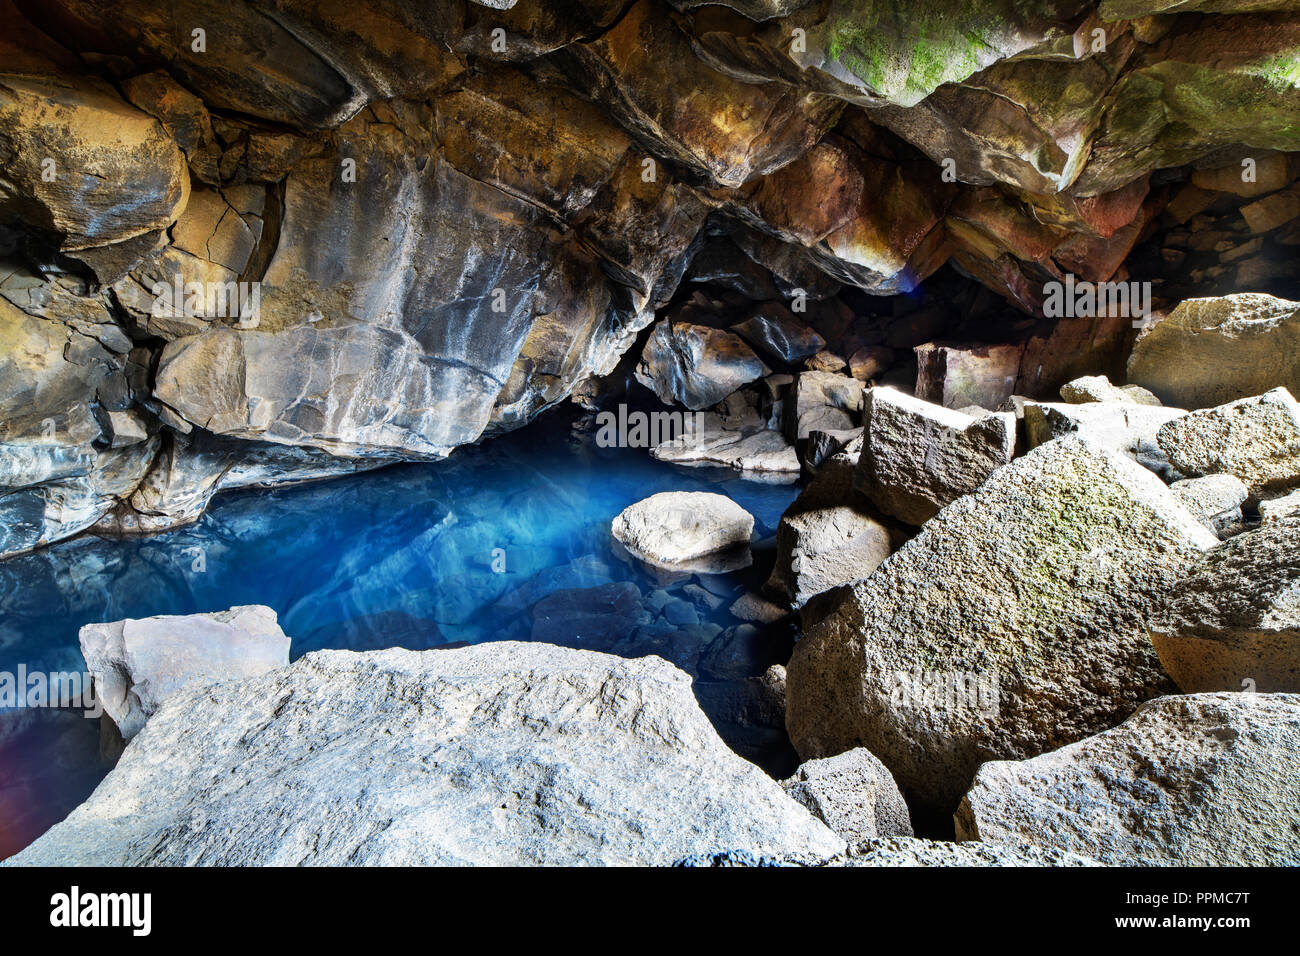 A cave filled with hot water in Iceland. Stock Photo